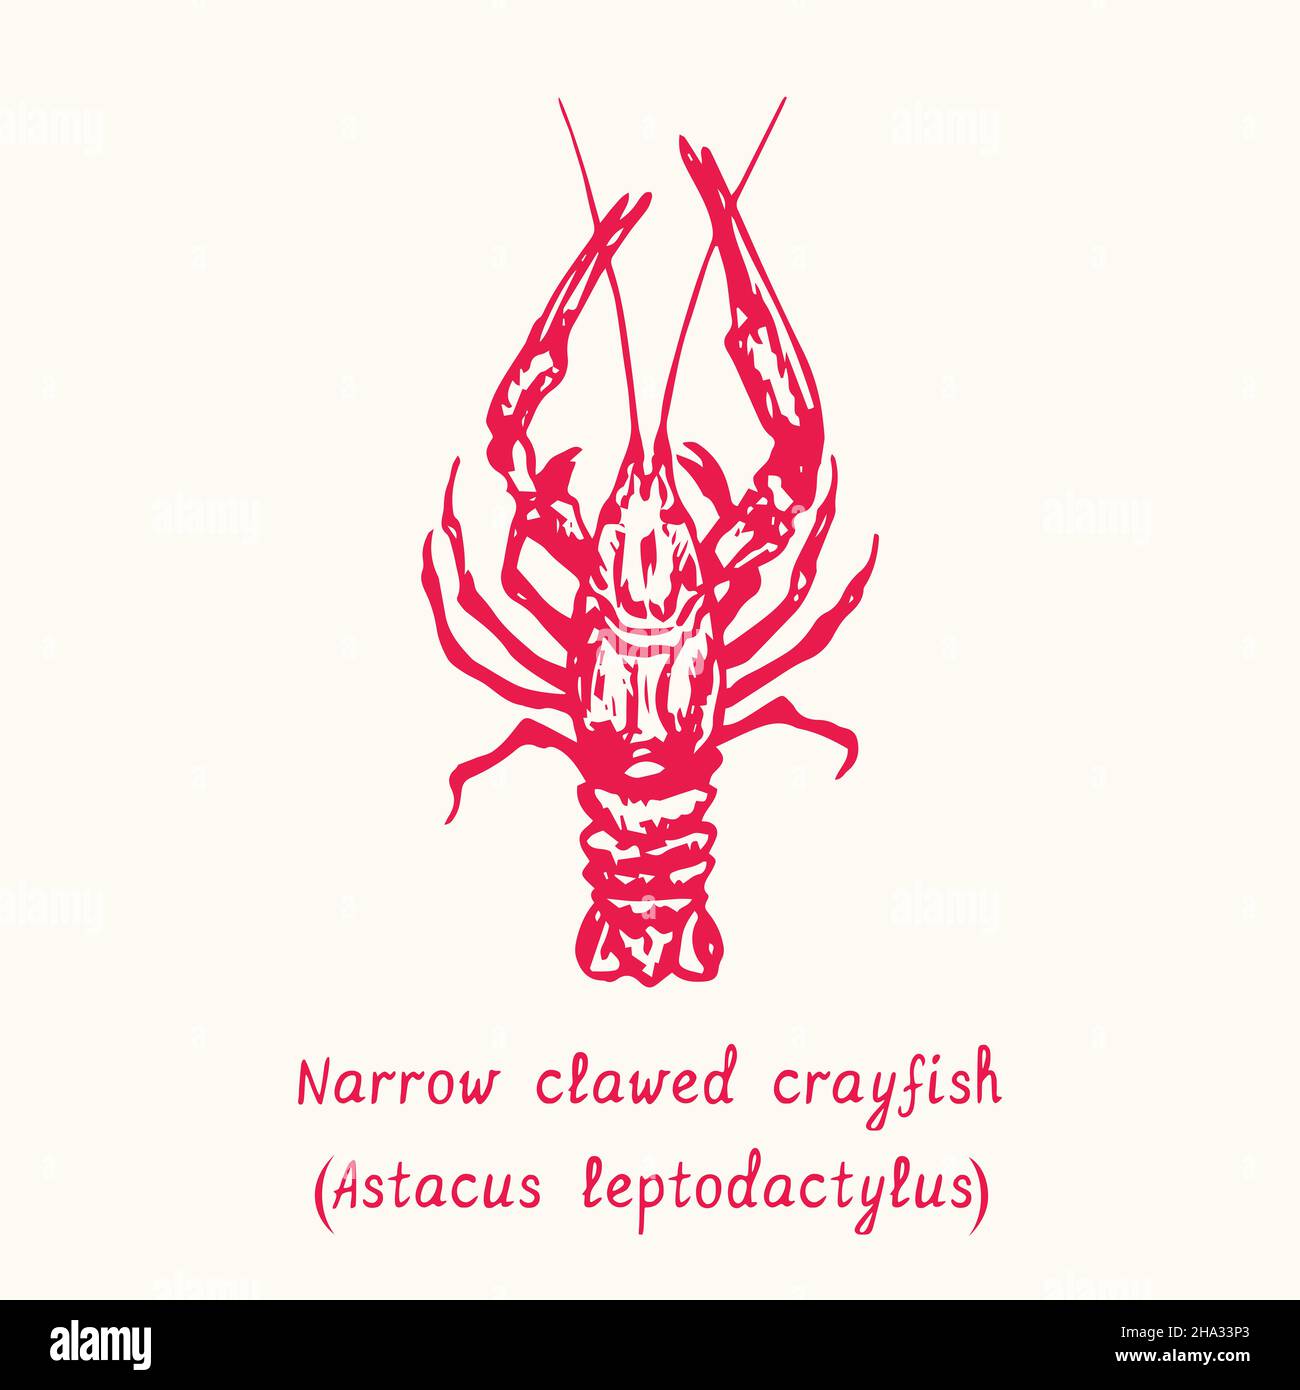 Narrow clawed crayfish (Astacus leptodactylus). Ink black and white doodle drawing in woodcut style with inscription. Stock Photo